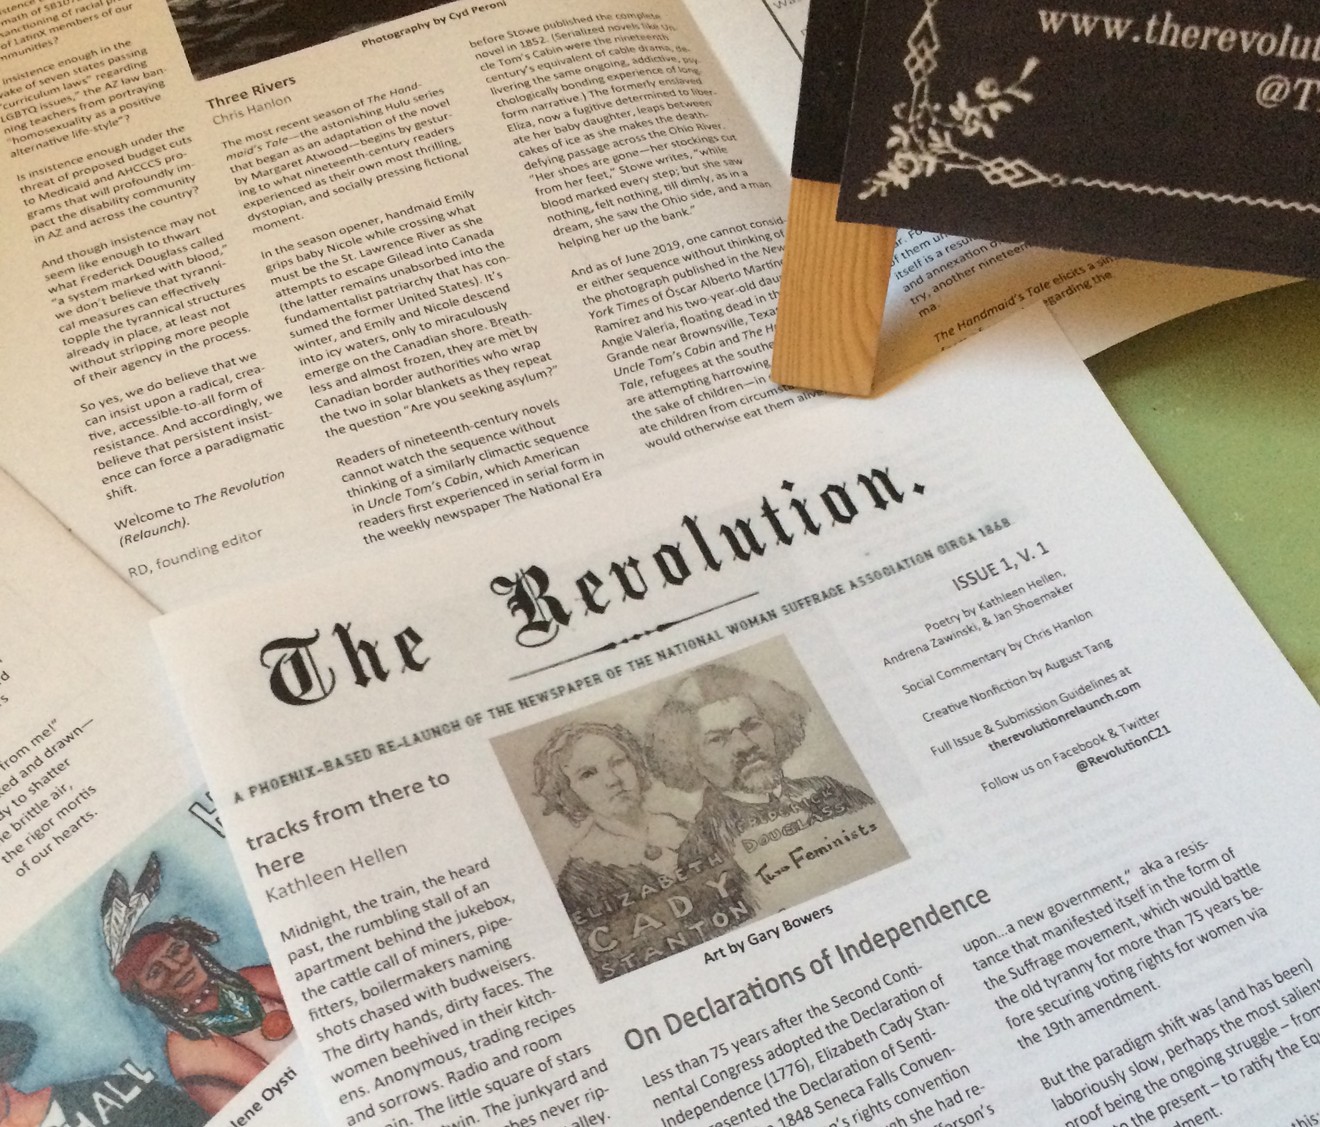 The print edition of The Revolution (Relaunch).